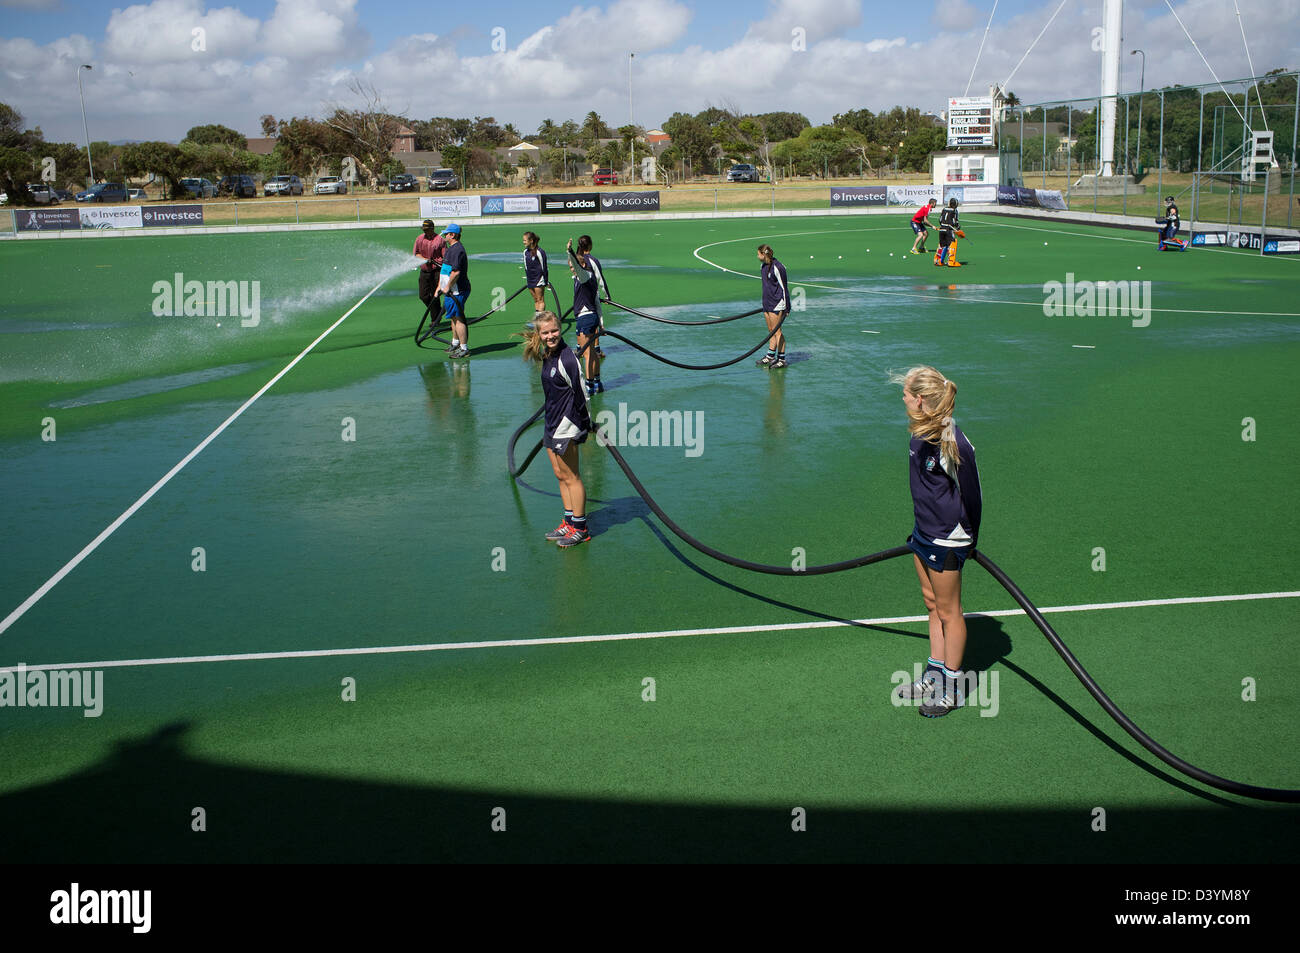 Young hockey players assist the ground staff in watering the pitch pre match at Hartleyvale Stadium Cape Town S Africa Stock Photo